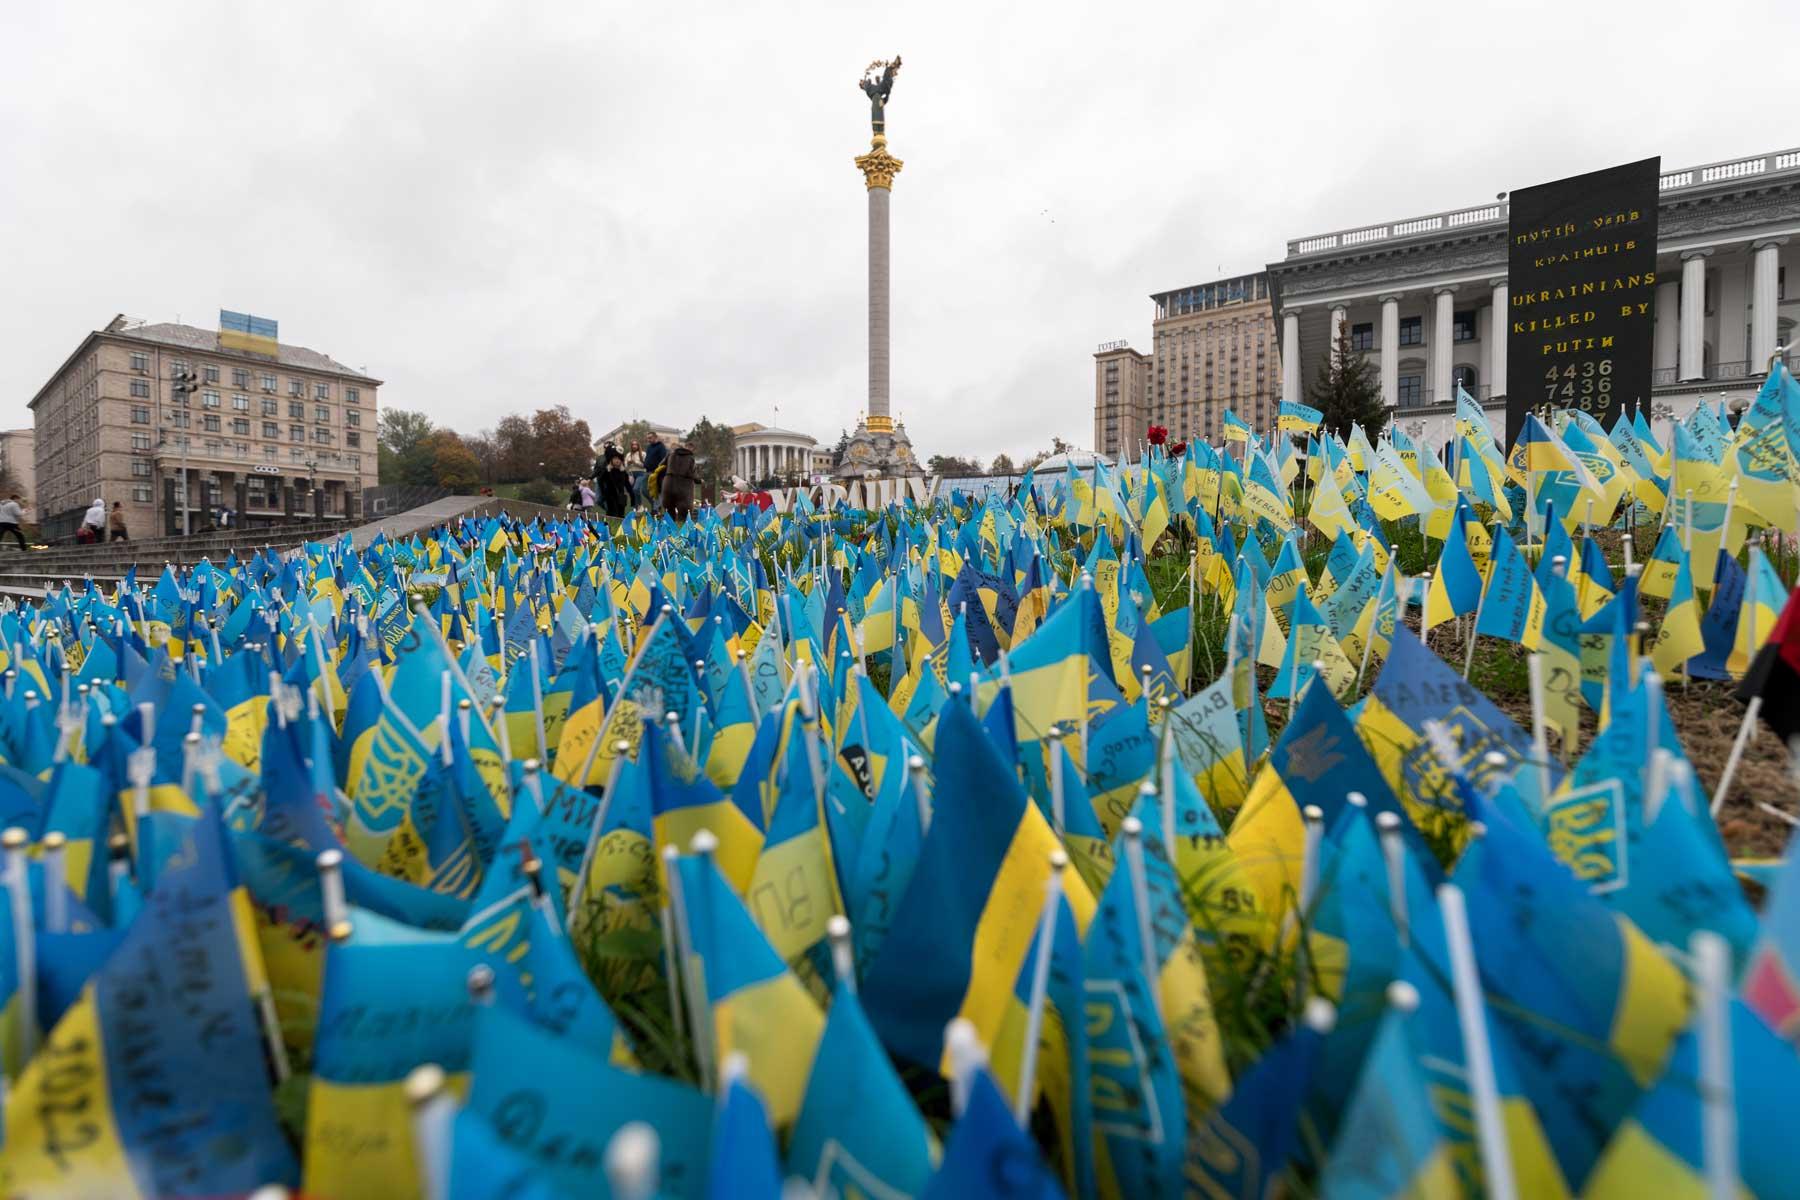 At the Maidan Nezalezhnosti – Independence Square – thousands of Ukrainian flags have been placed in front of the Independence Monument, in memory of those whose lives have been lost since the invasion of Ukraine by Russian military forces in February 2022. Photo: LWF/ Albin Hillert